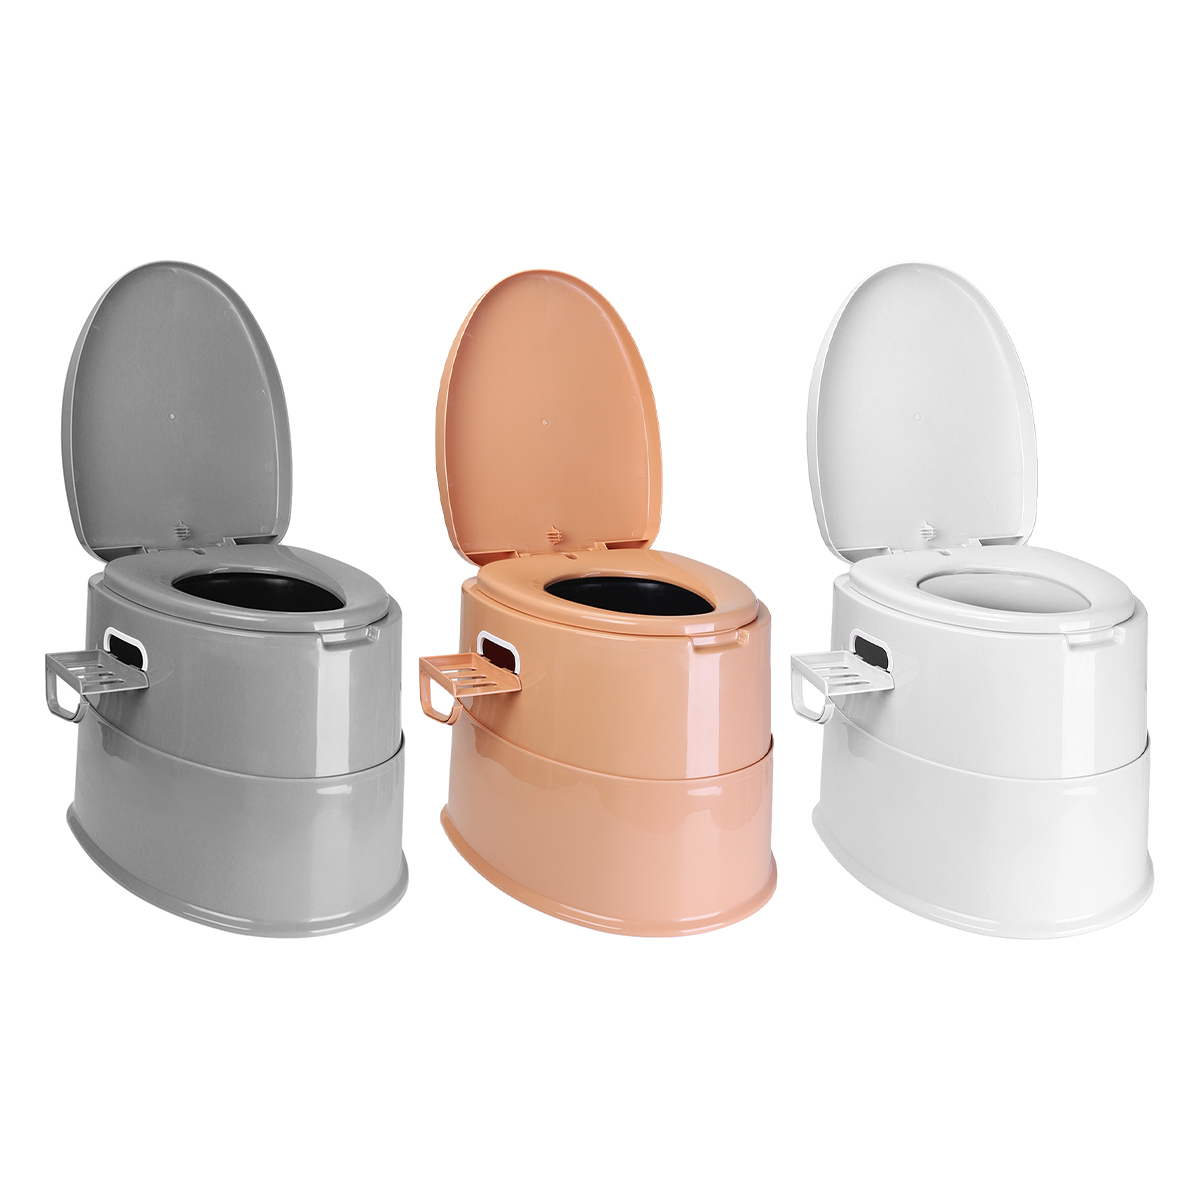 Portable Toilet Squatting Elderly Toilet Stool Multifunction Bedpan Pregnant Elderly Urinal Stool Chair With Paper Roll Holder